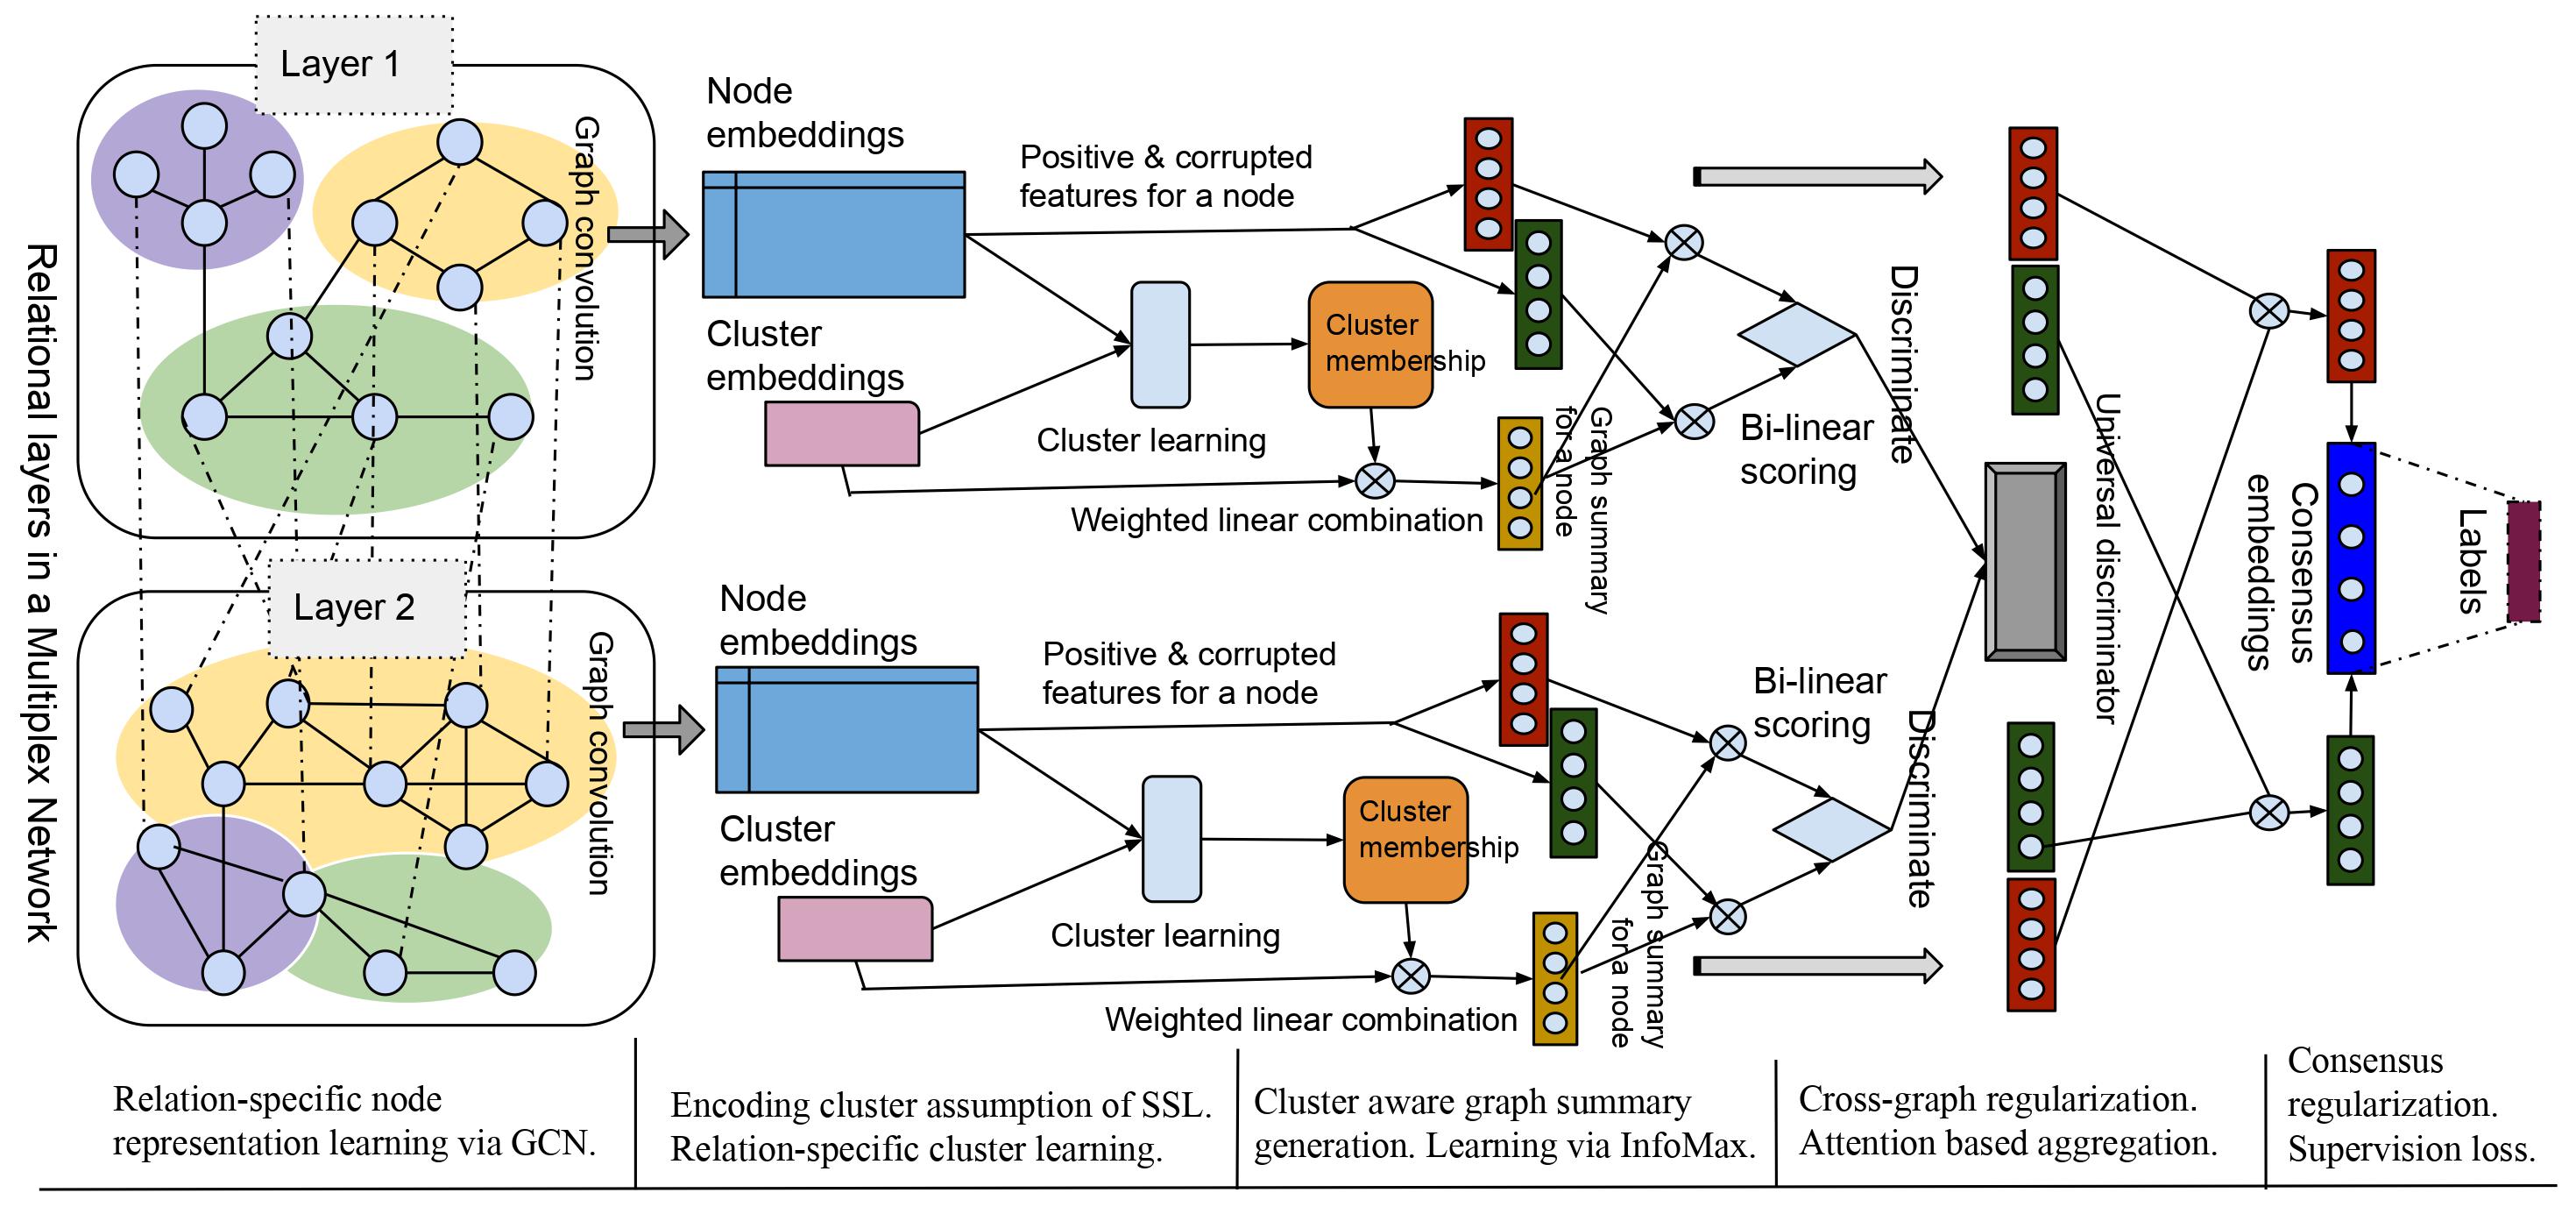 Semi-Supervised Deep Learning for Multiplex Networks